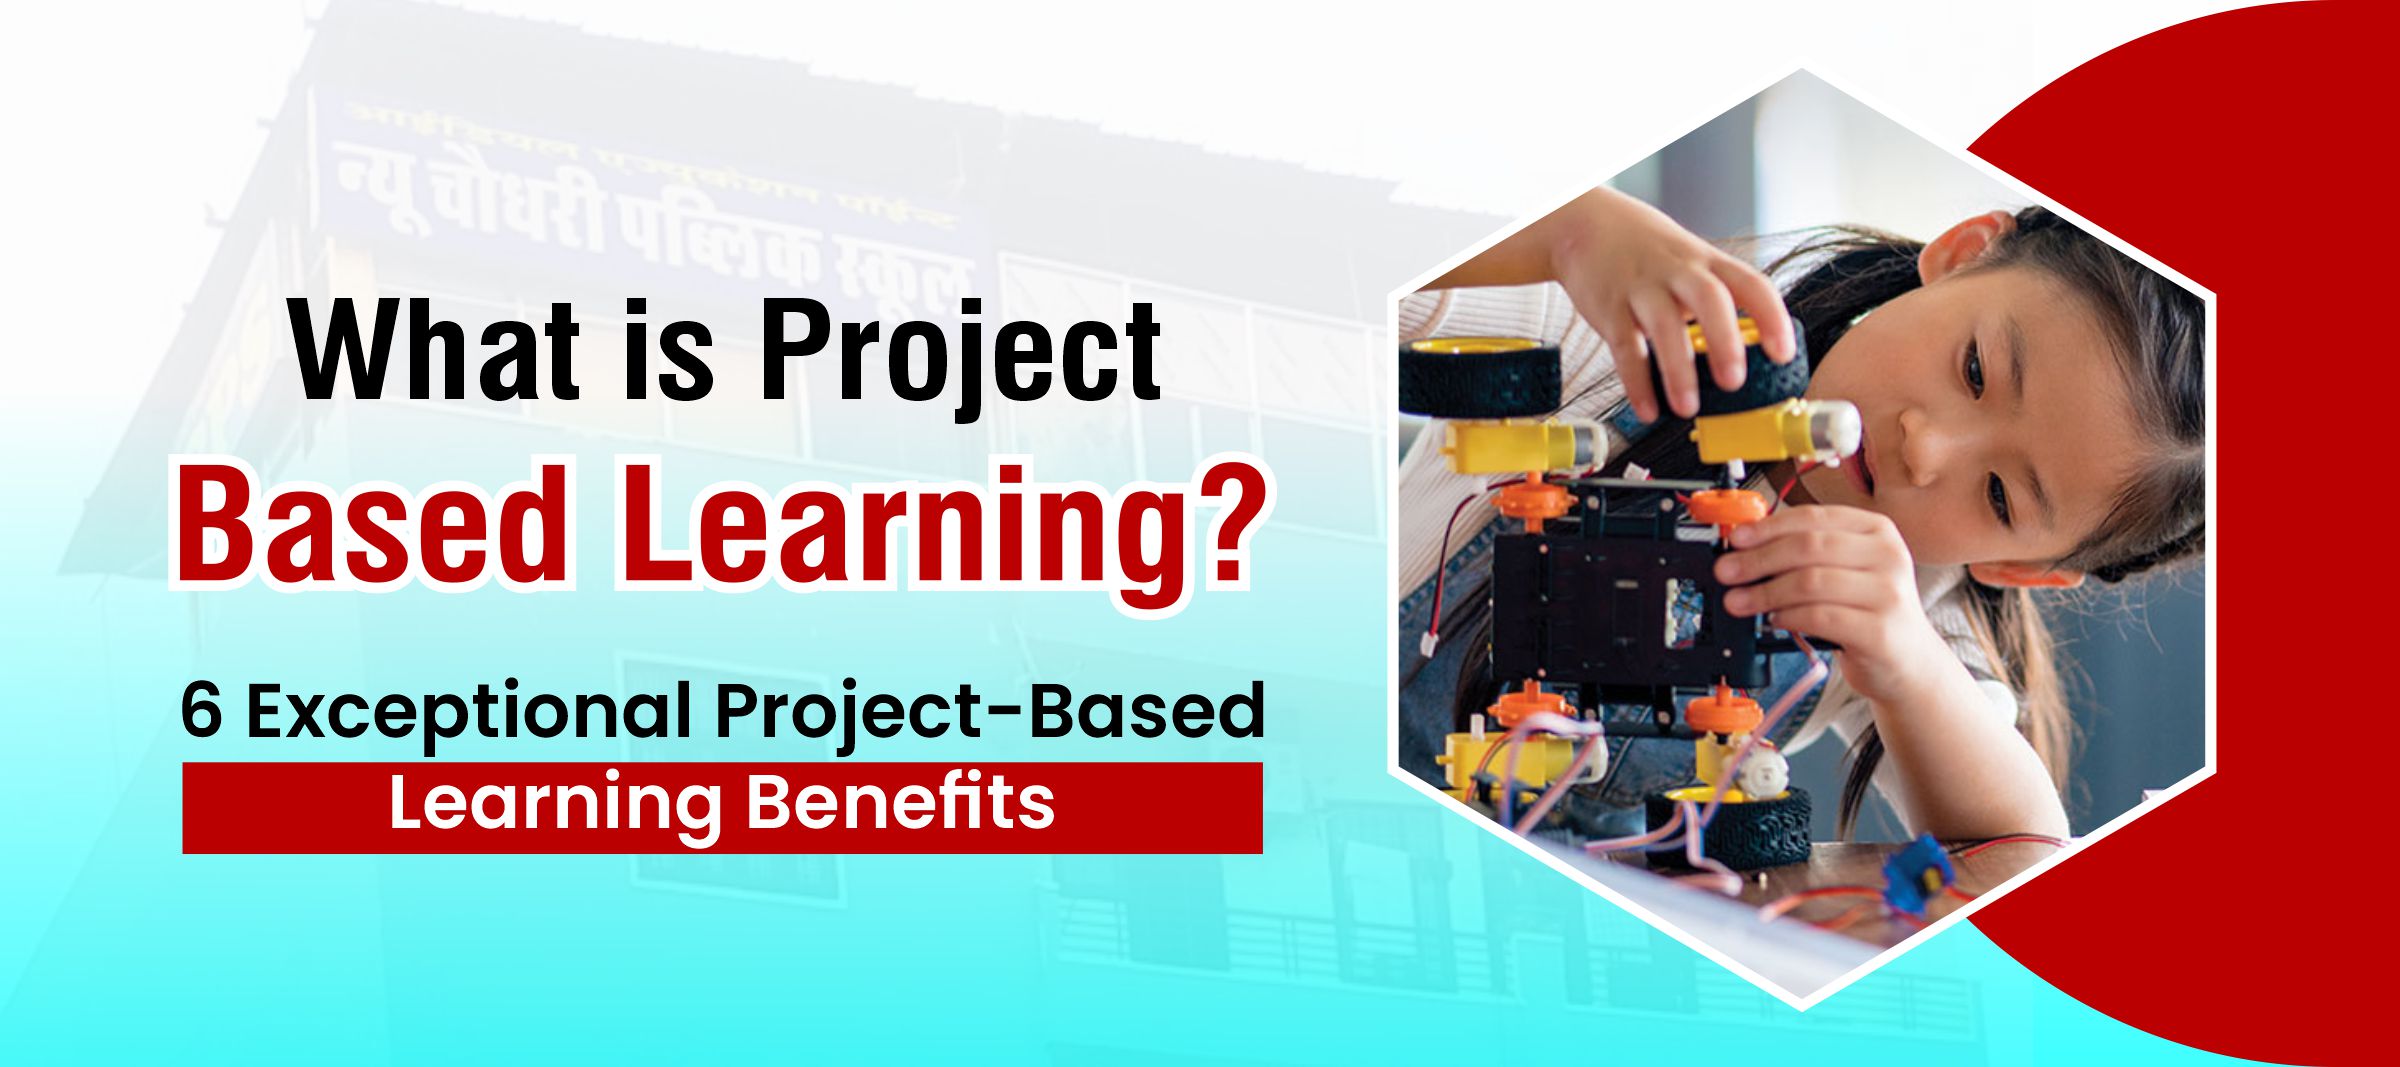 What is Project Based Learning? 6 Exceptional Project-Based Learning Benefits